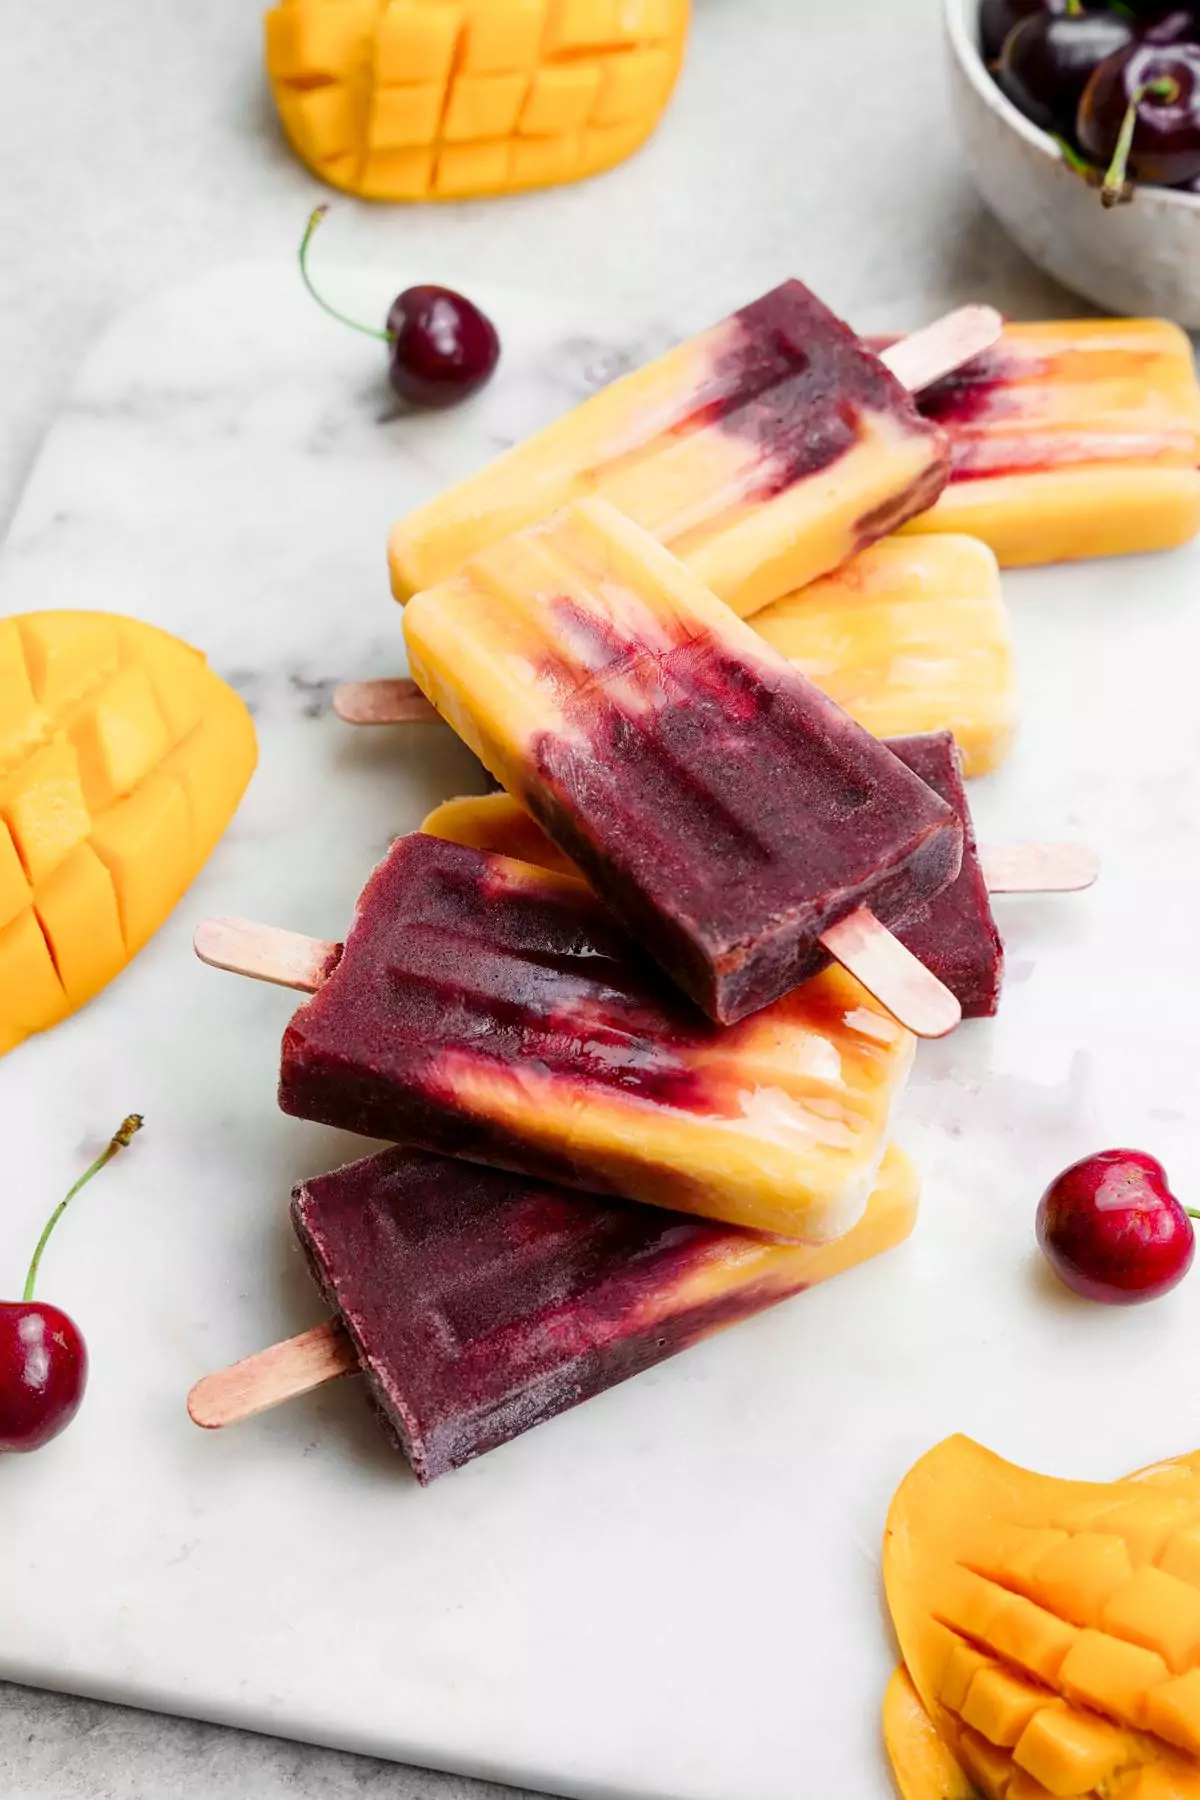 Easy summer popsicle recipes to try